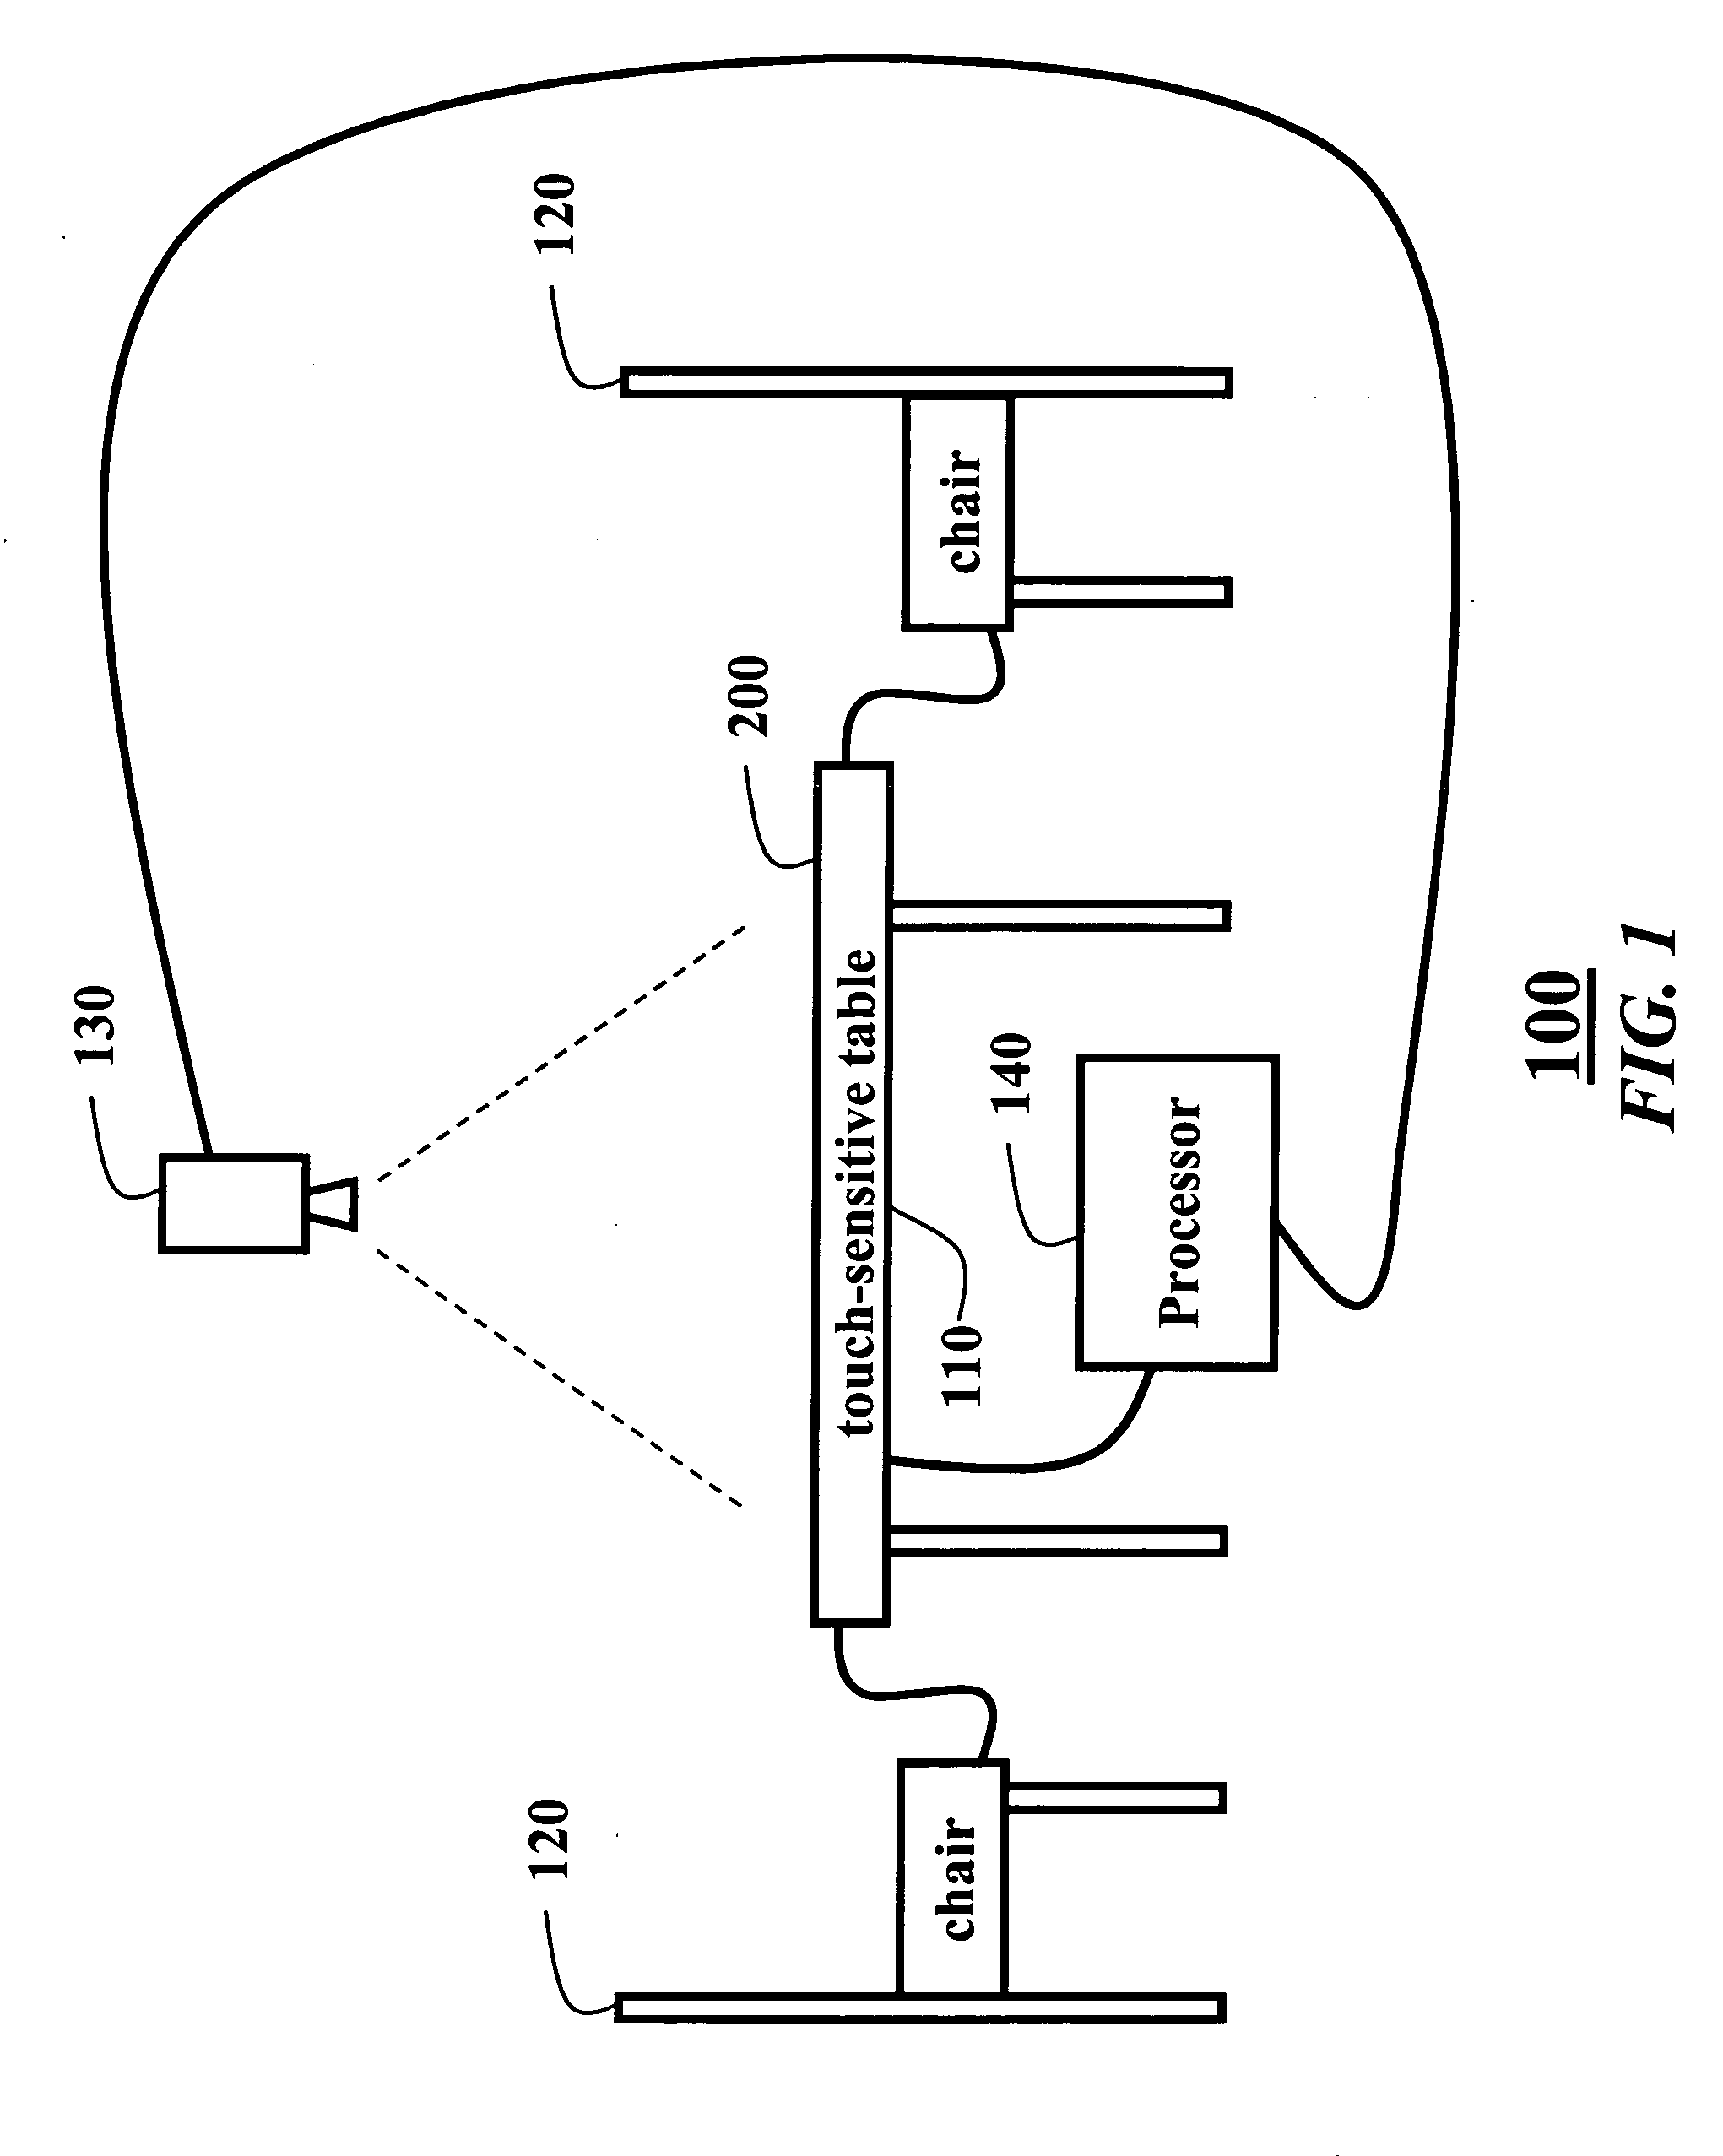 Method and system for manipulating graphical objects displayed on a touch-sensitive display surface using displaced pop-ups